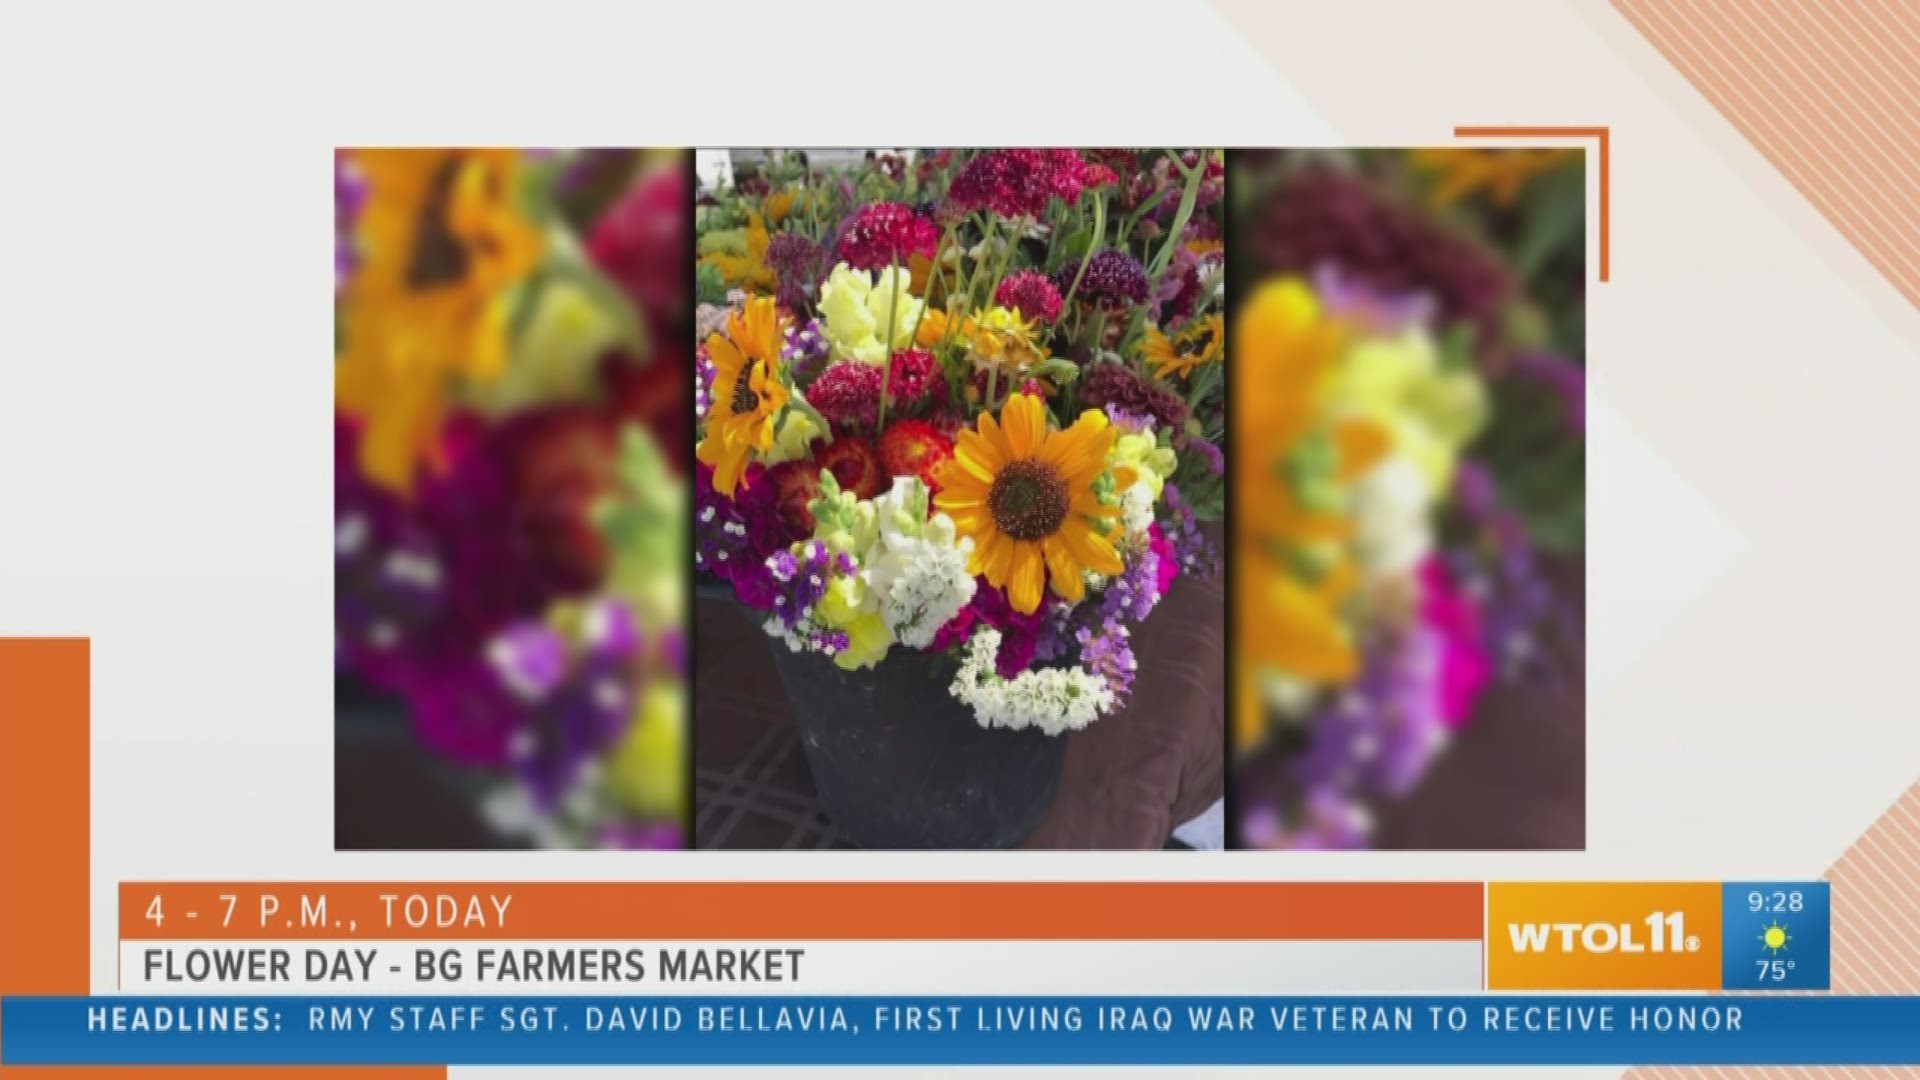 Get flowers, fruit and lots of other good stuff at the Bowling Green Farmer's Market!